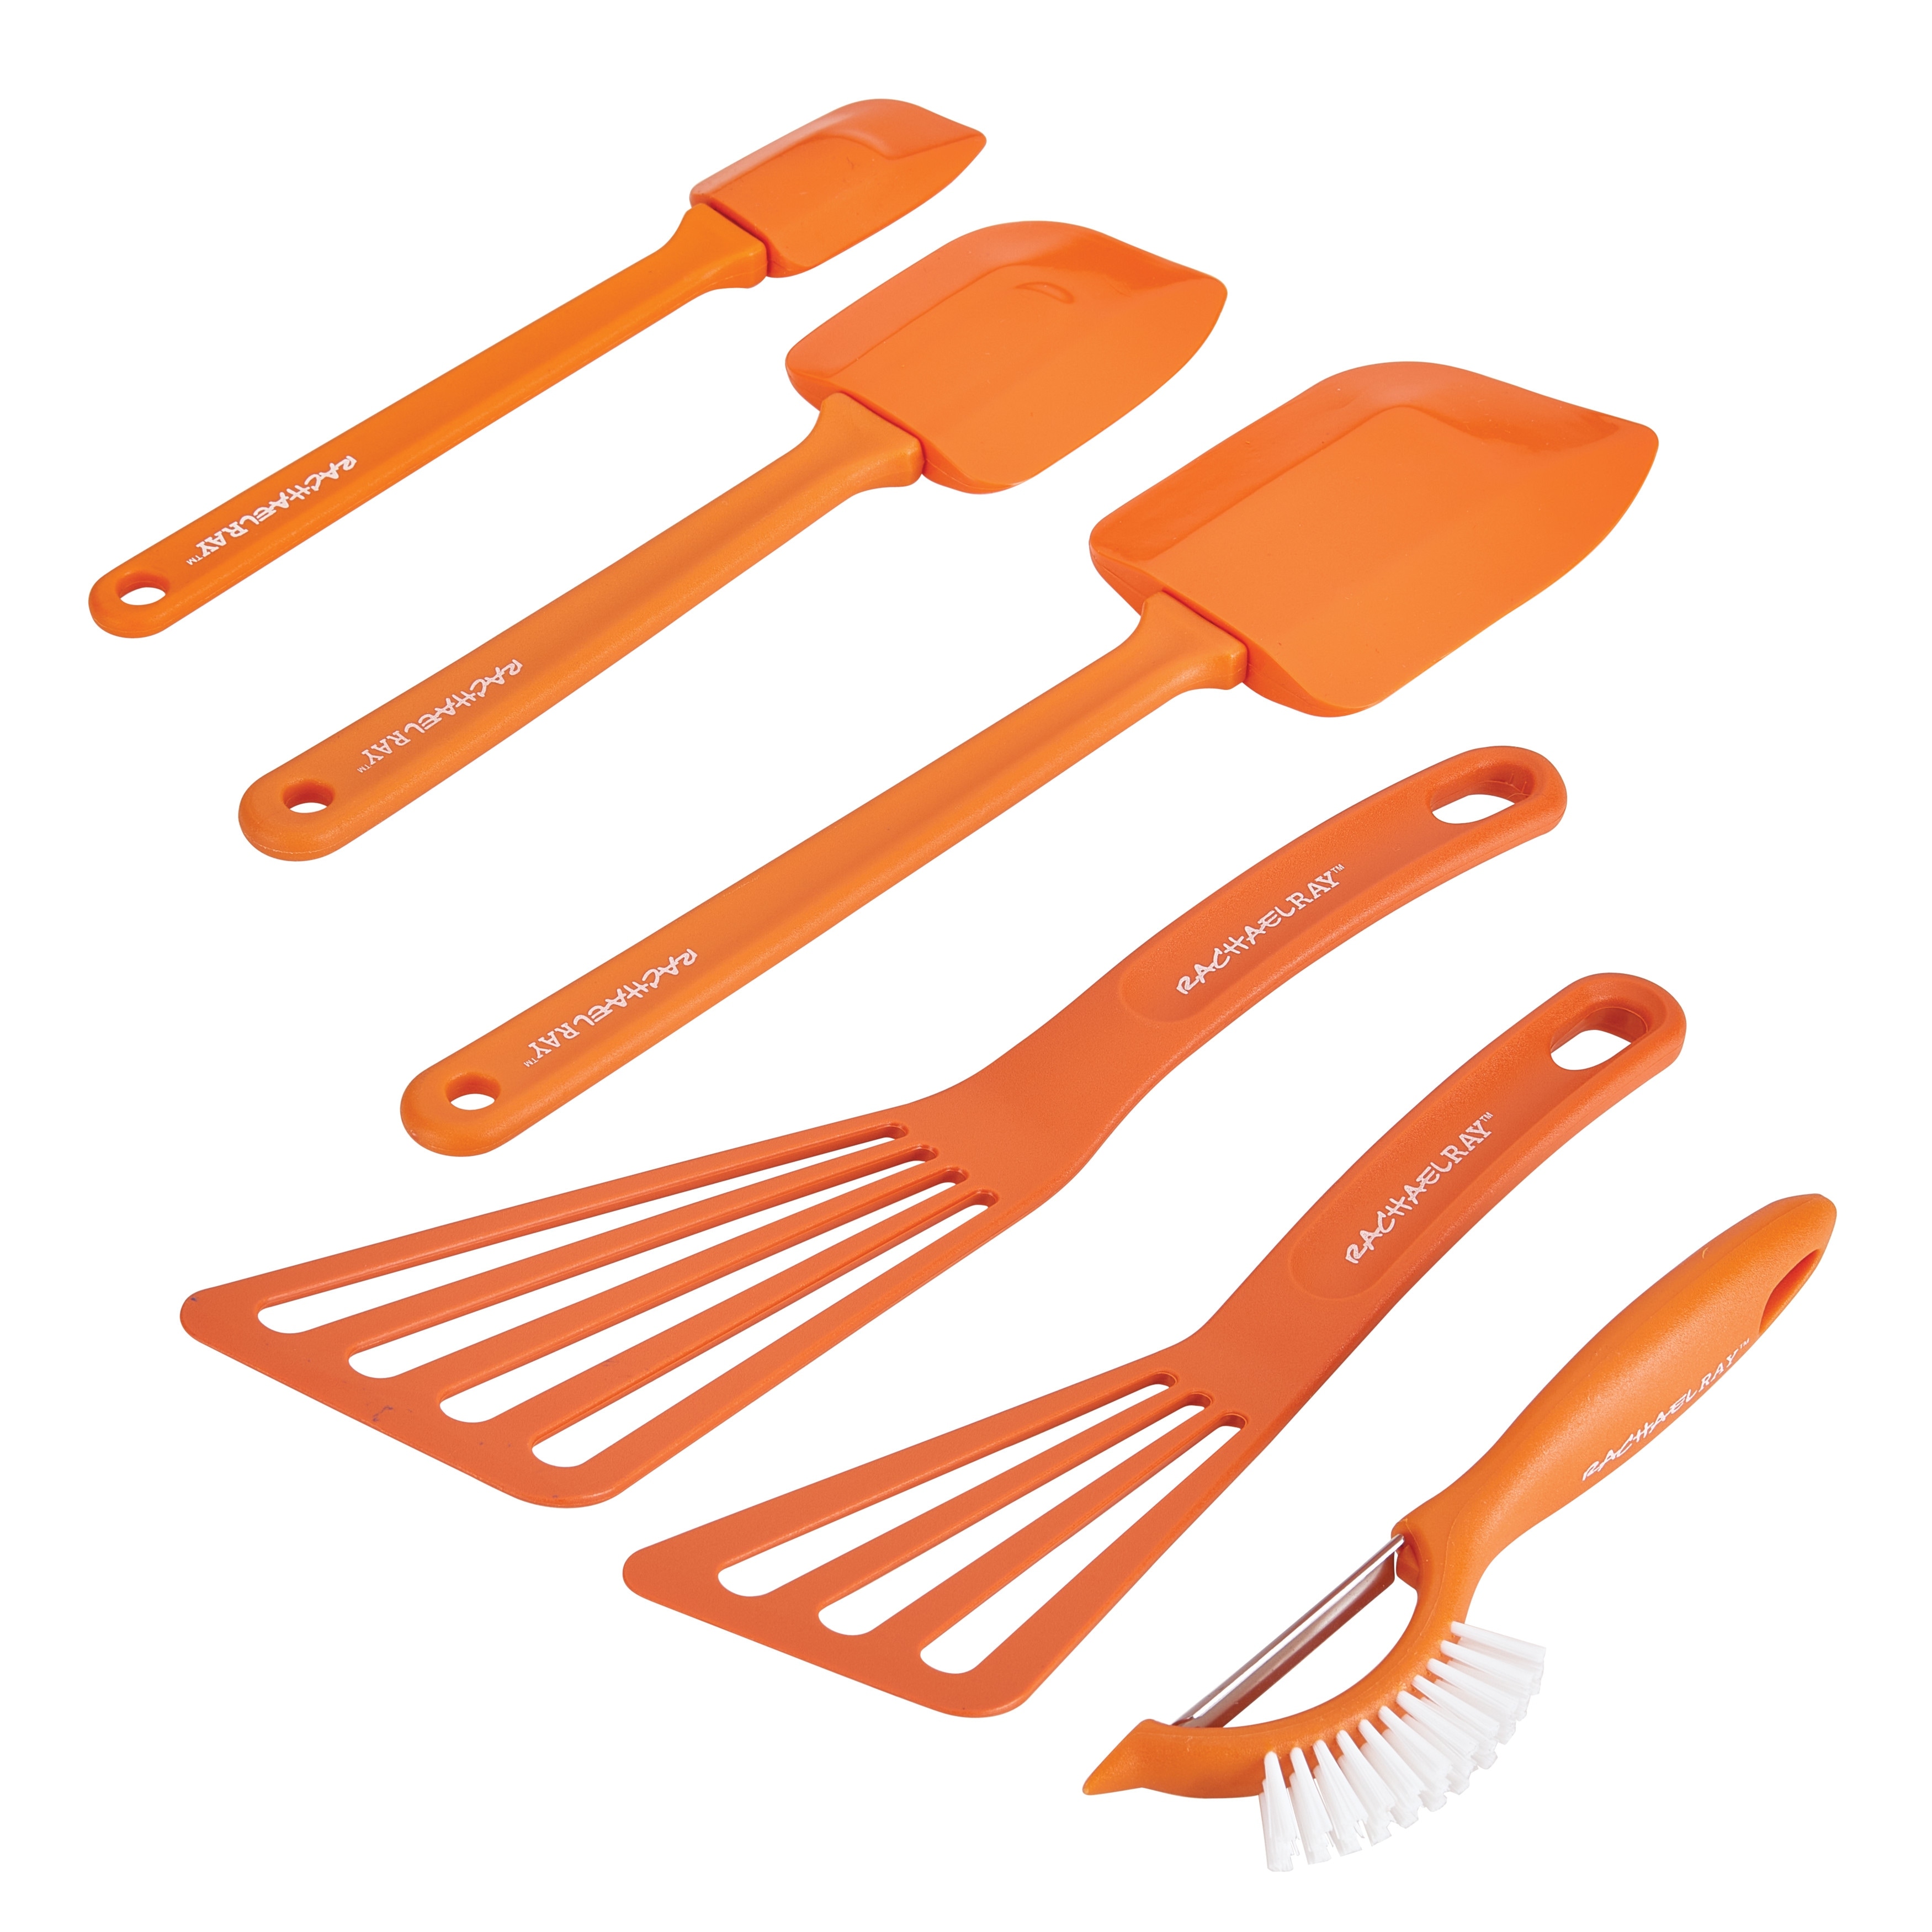 Rachael Ray Tools and Gadgets Cookware Handle Silicone Sleeve Set, 3-Piece, Dark Gray